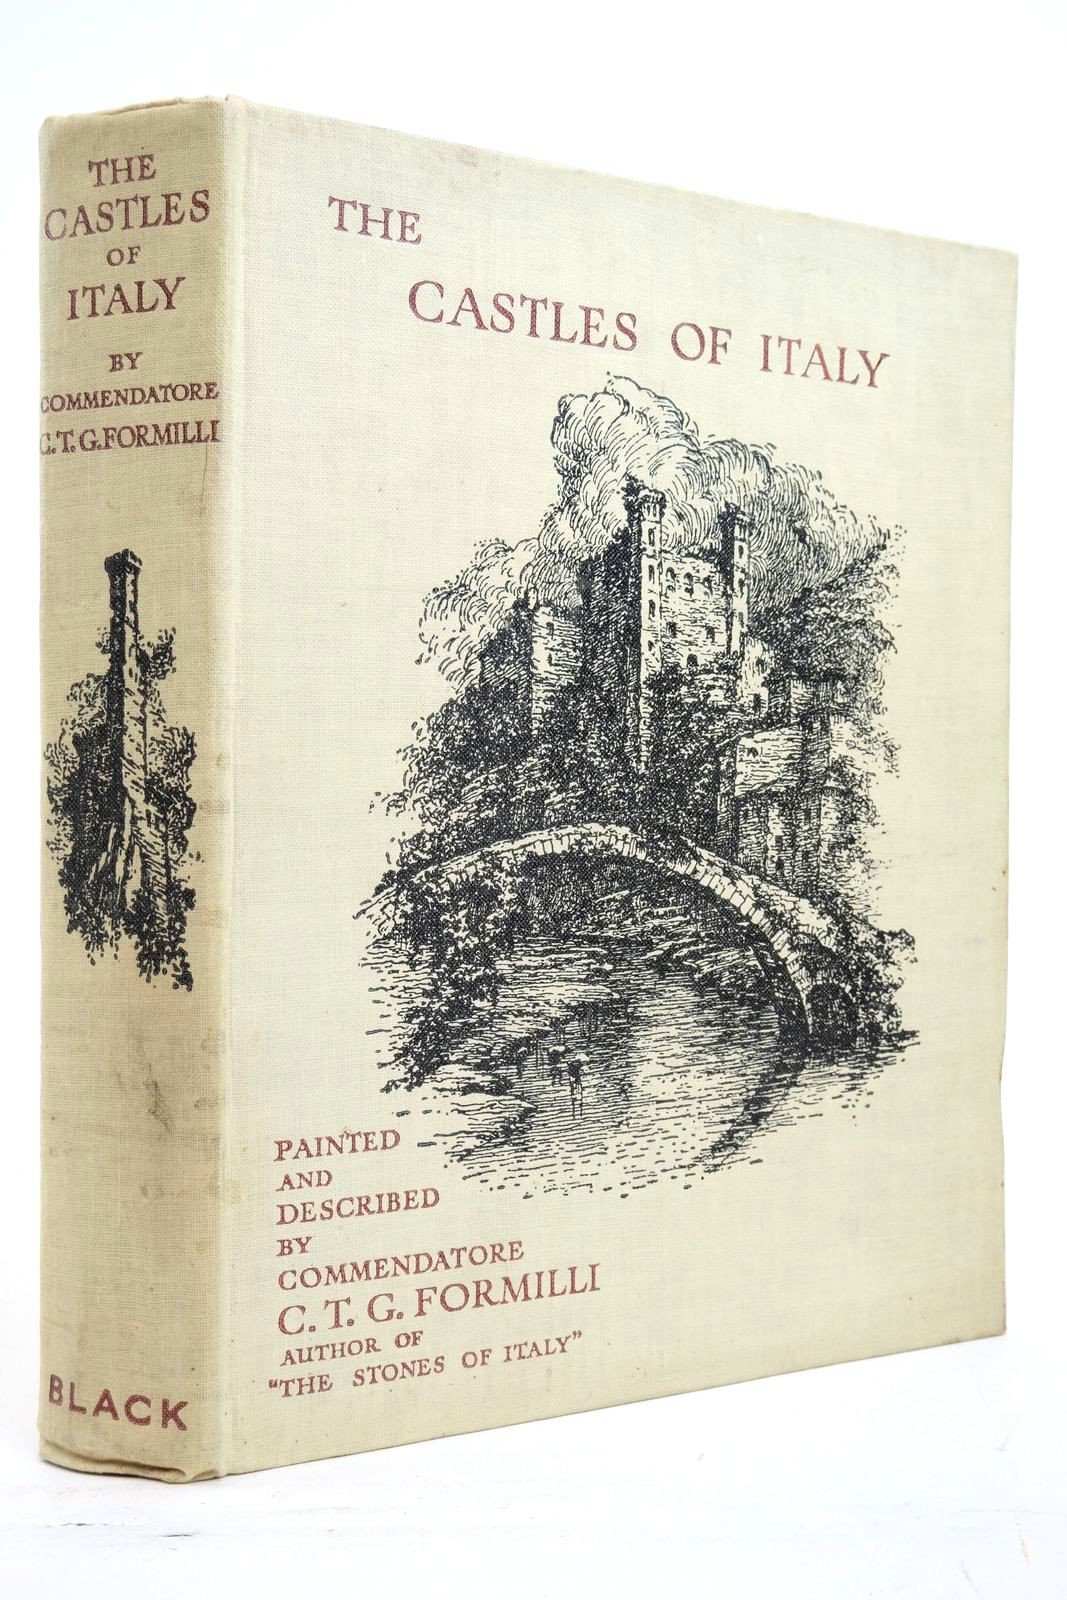 Photo of THE CASTLES OF ITALY written by Formilli, C.T.G. illustrated by Formilli, C.T.G. published by A. &amp; C. Black Ltd. (STOCK CODE: 2136951)  for sale by Stella & Rose's Books